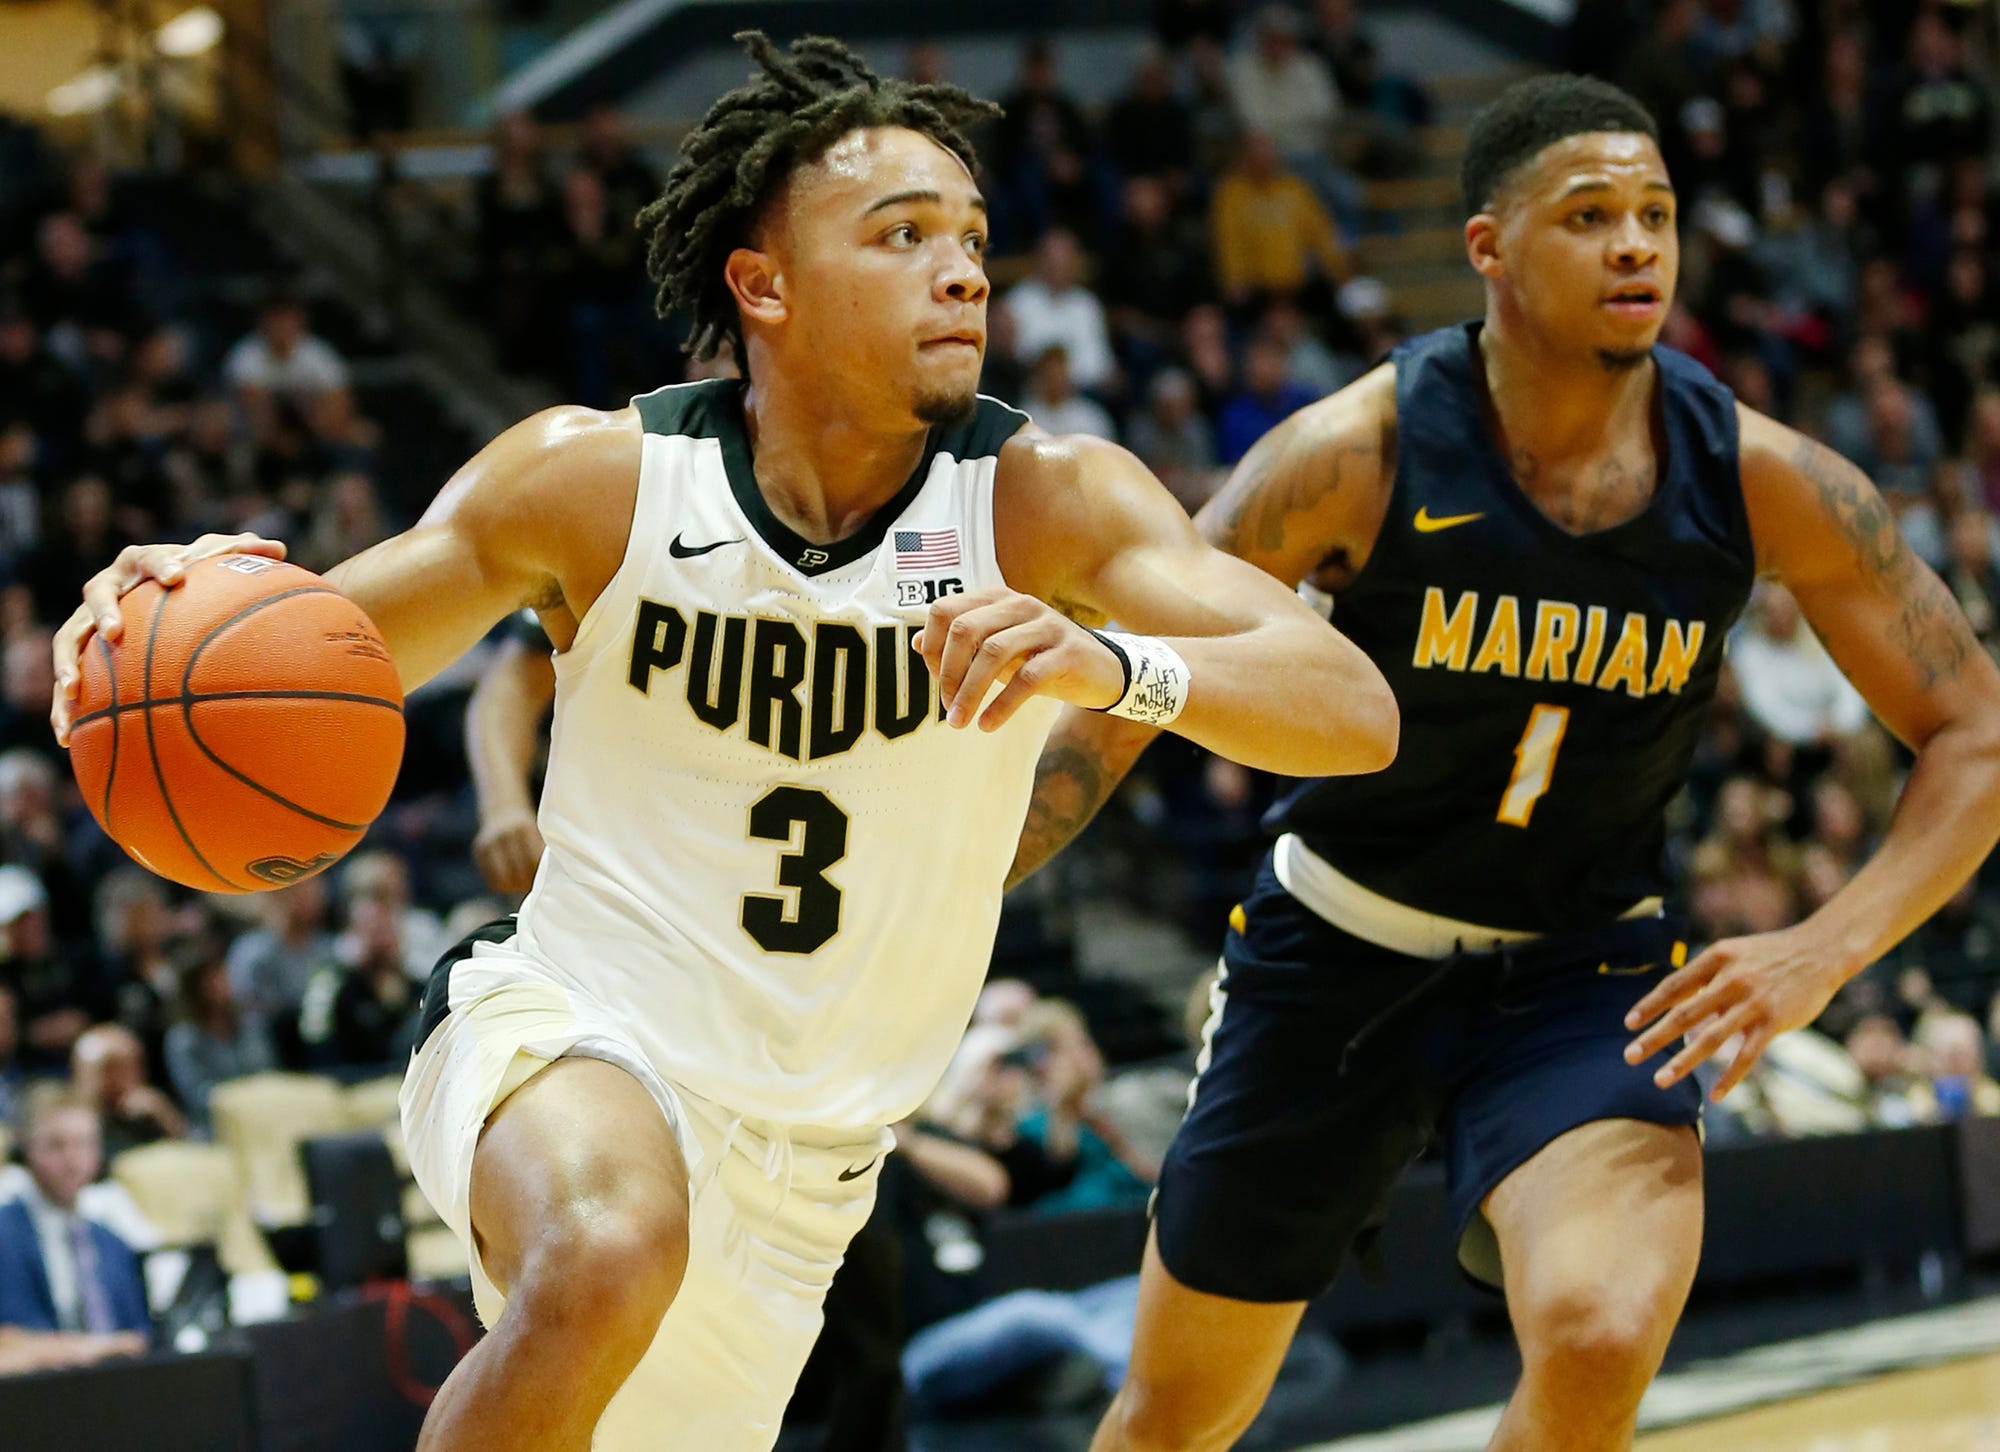 From 0 to 55 Purdue men's basketball's best by the numbers